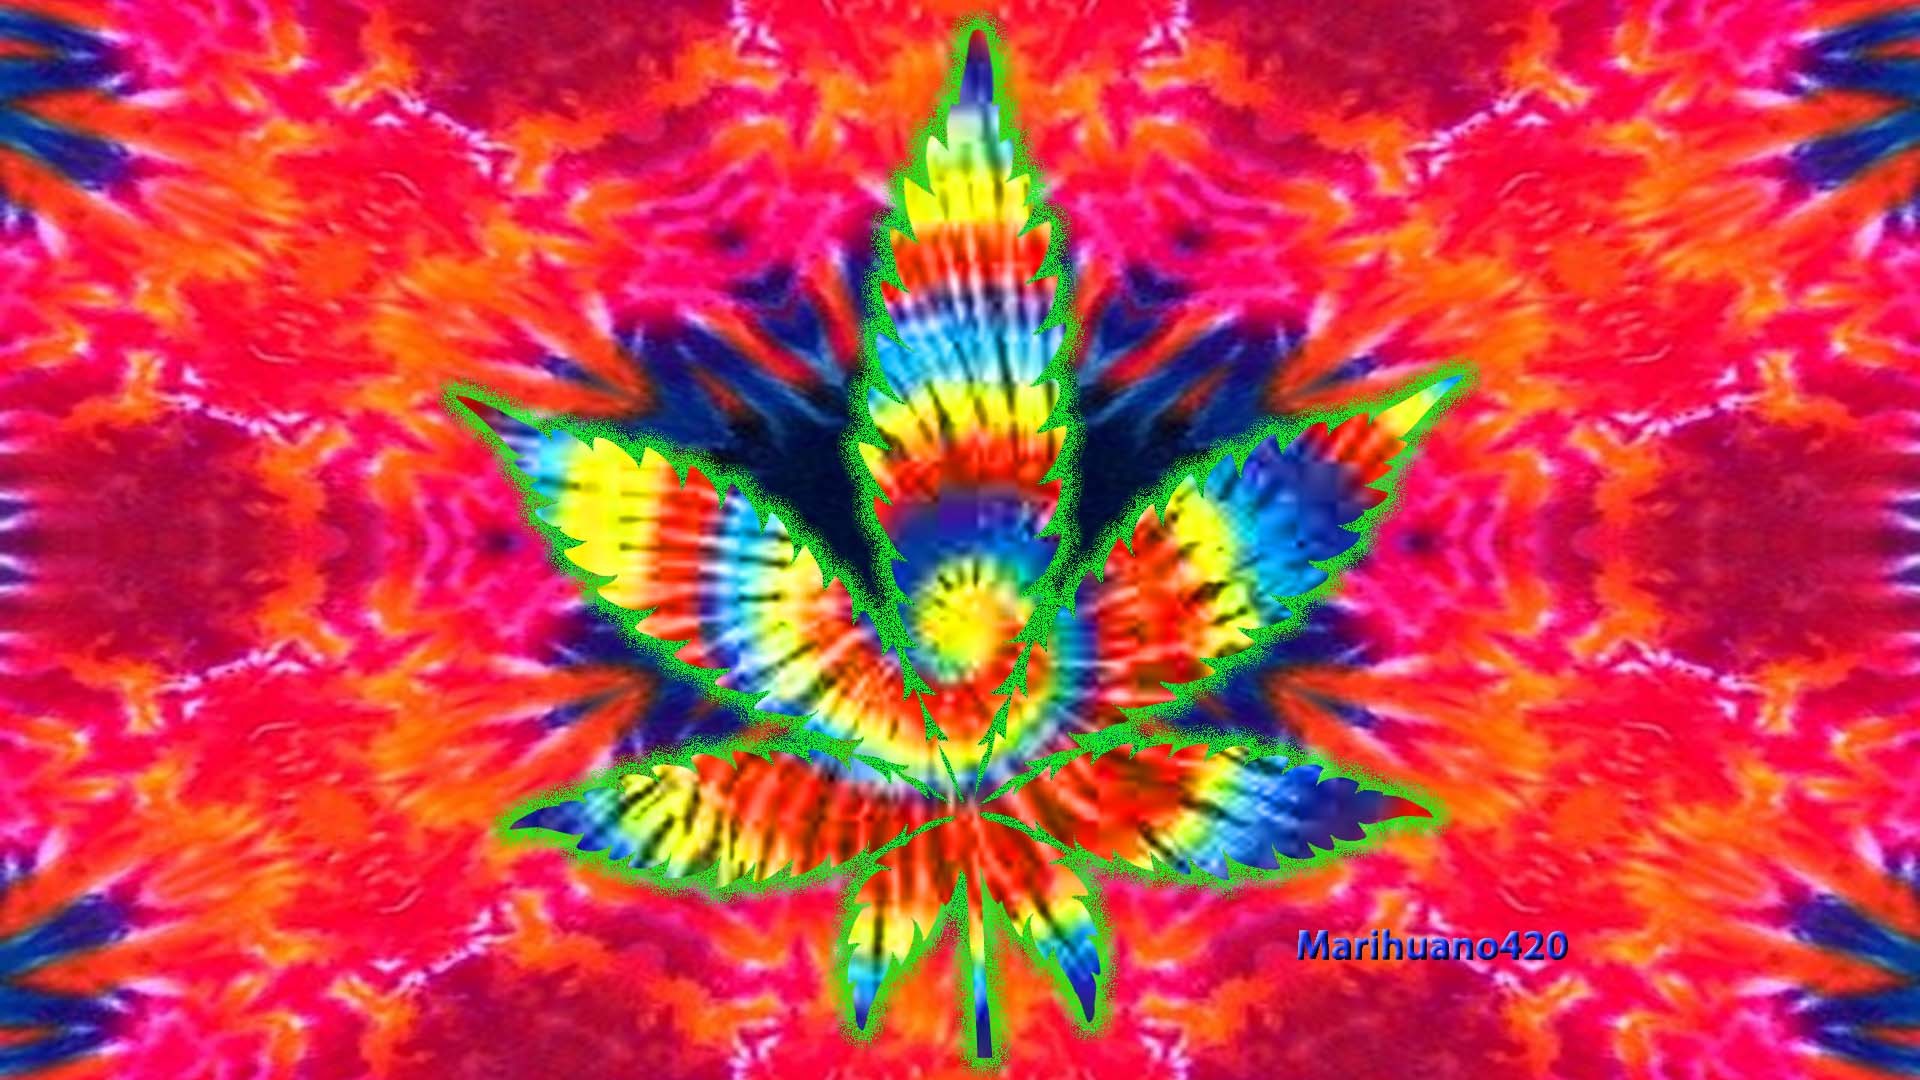 1920x1080 Trippy Weed Backgrounds Tumblr Hippie wallpaper weed